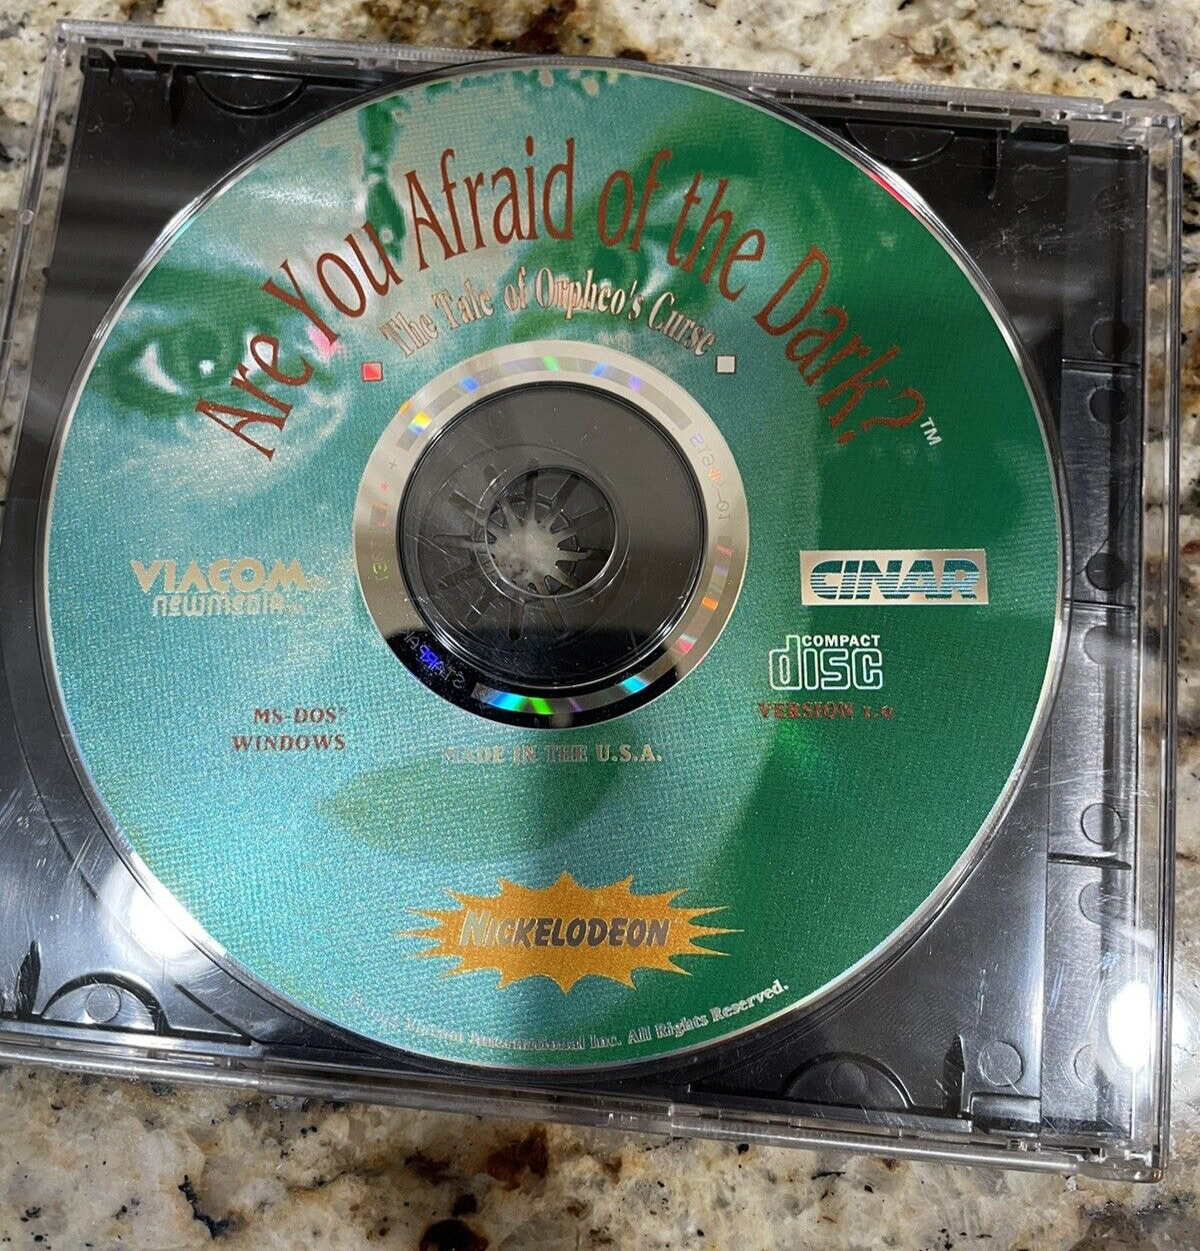 Are You Afraid Of the Dark The Tale of Orpheos Curse PC CD-ROM 1994 DISC ONLY